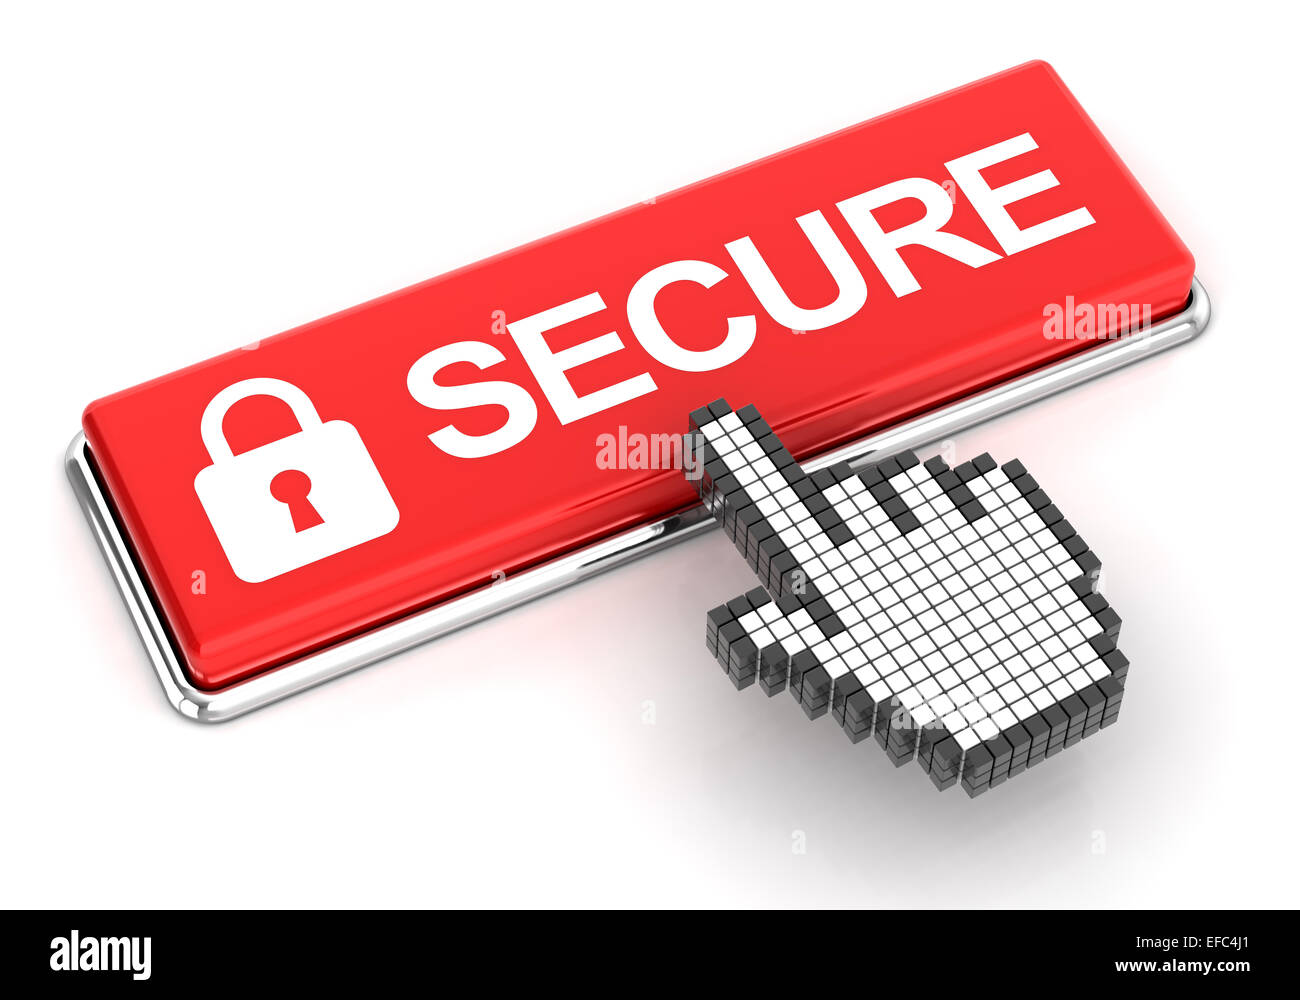 Clicking a secure button Stock Photo